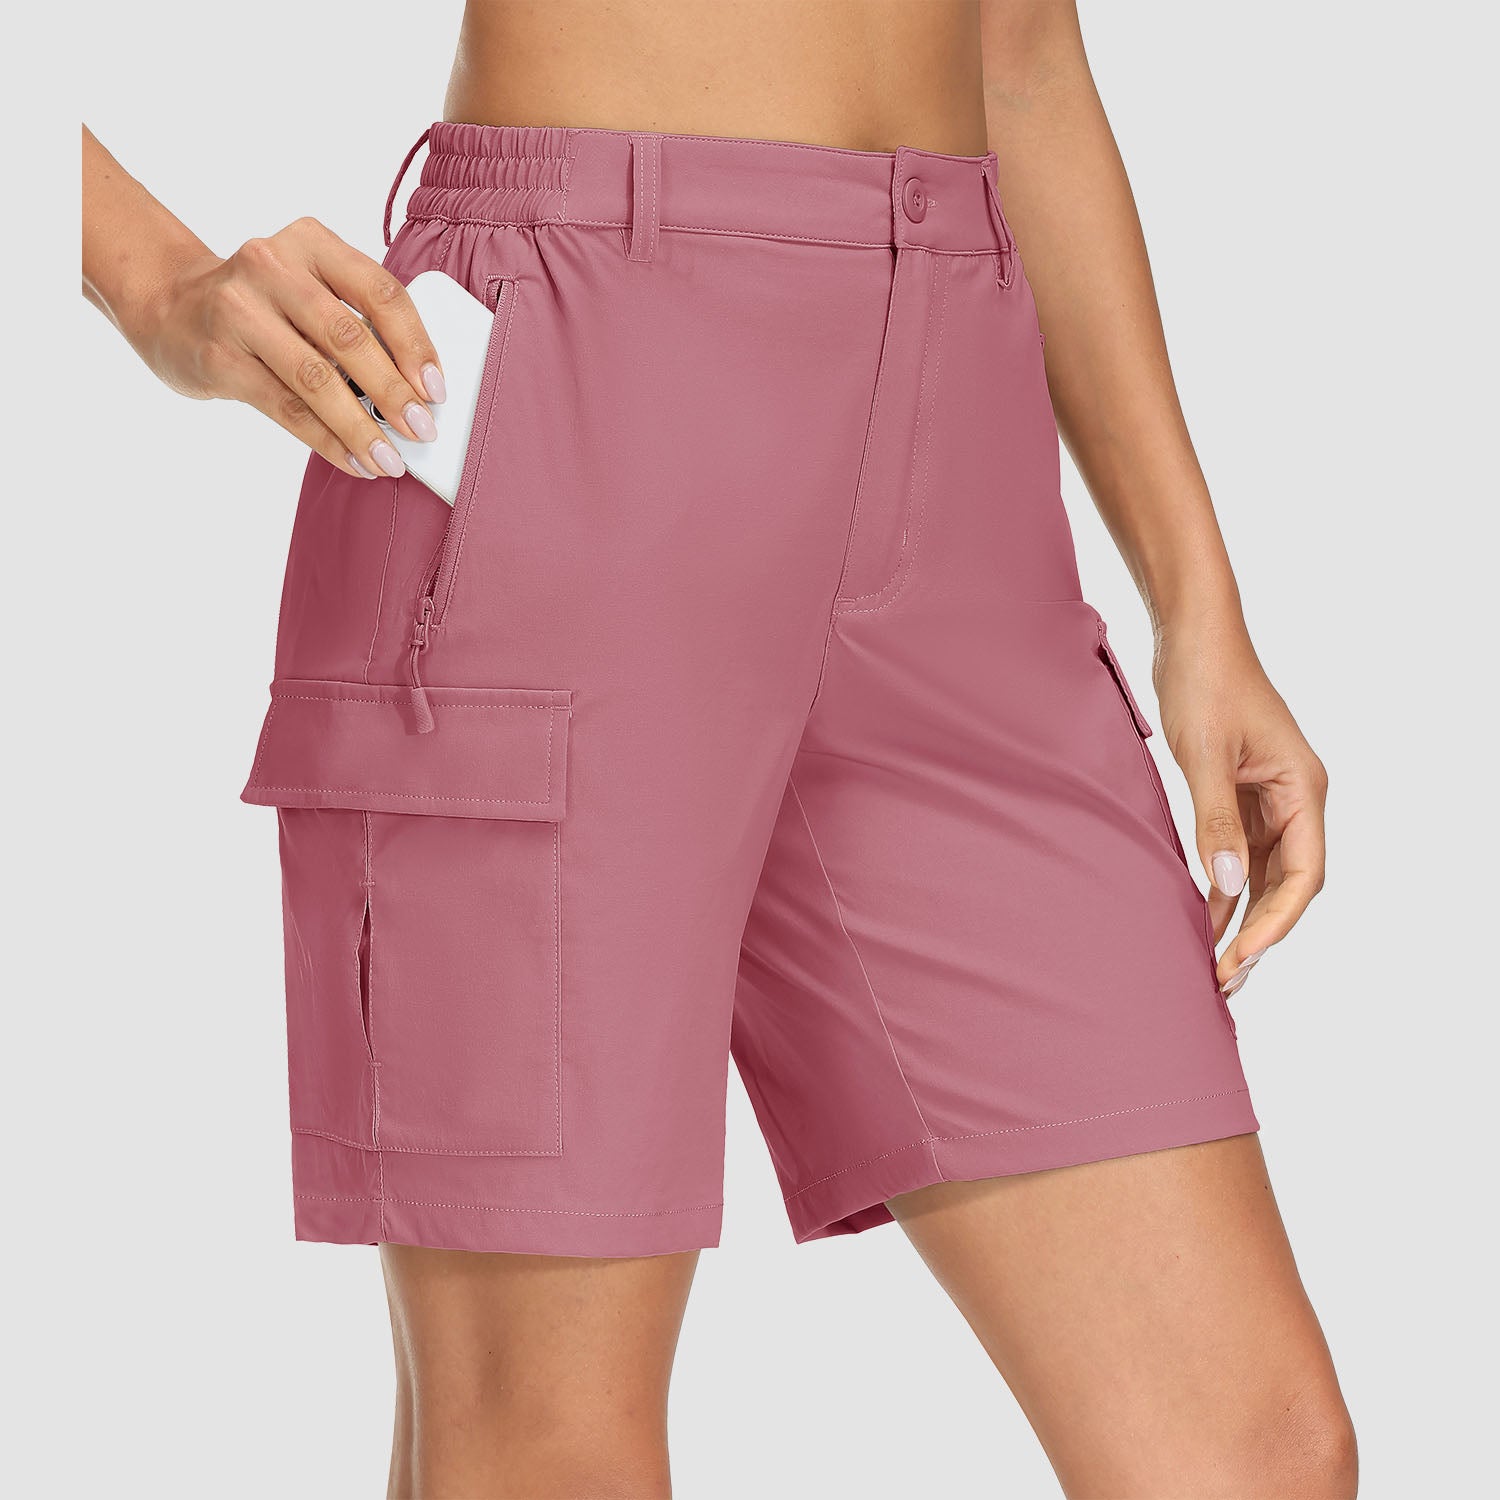 Women's Hiking Shorts Cargo Shorts Quick Dry with 5 Pockets Water-Resistant Ripstop